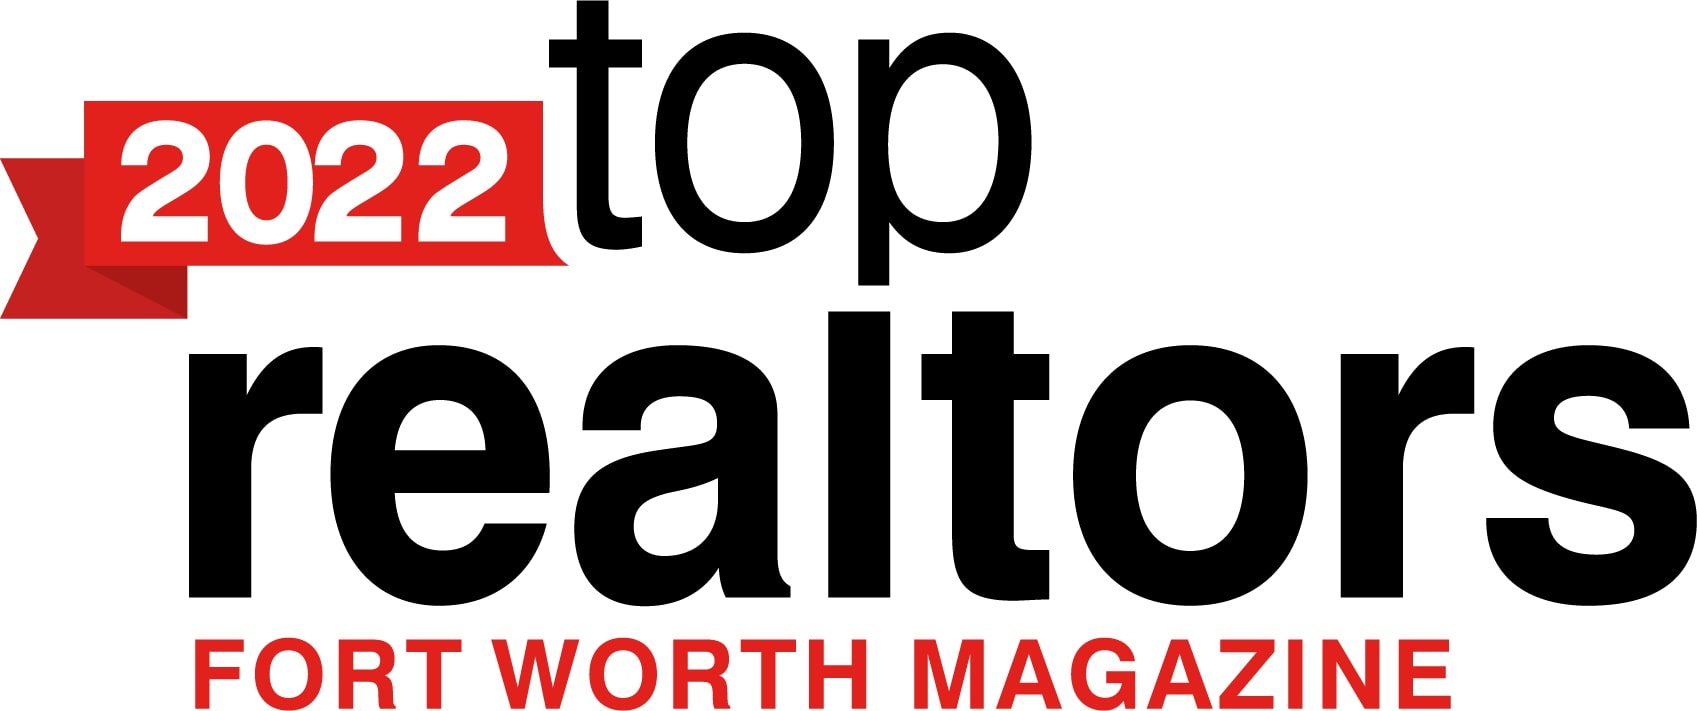 Top Southlake Realtor Award to Cindy Allen from Ft. Worth Magazine